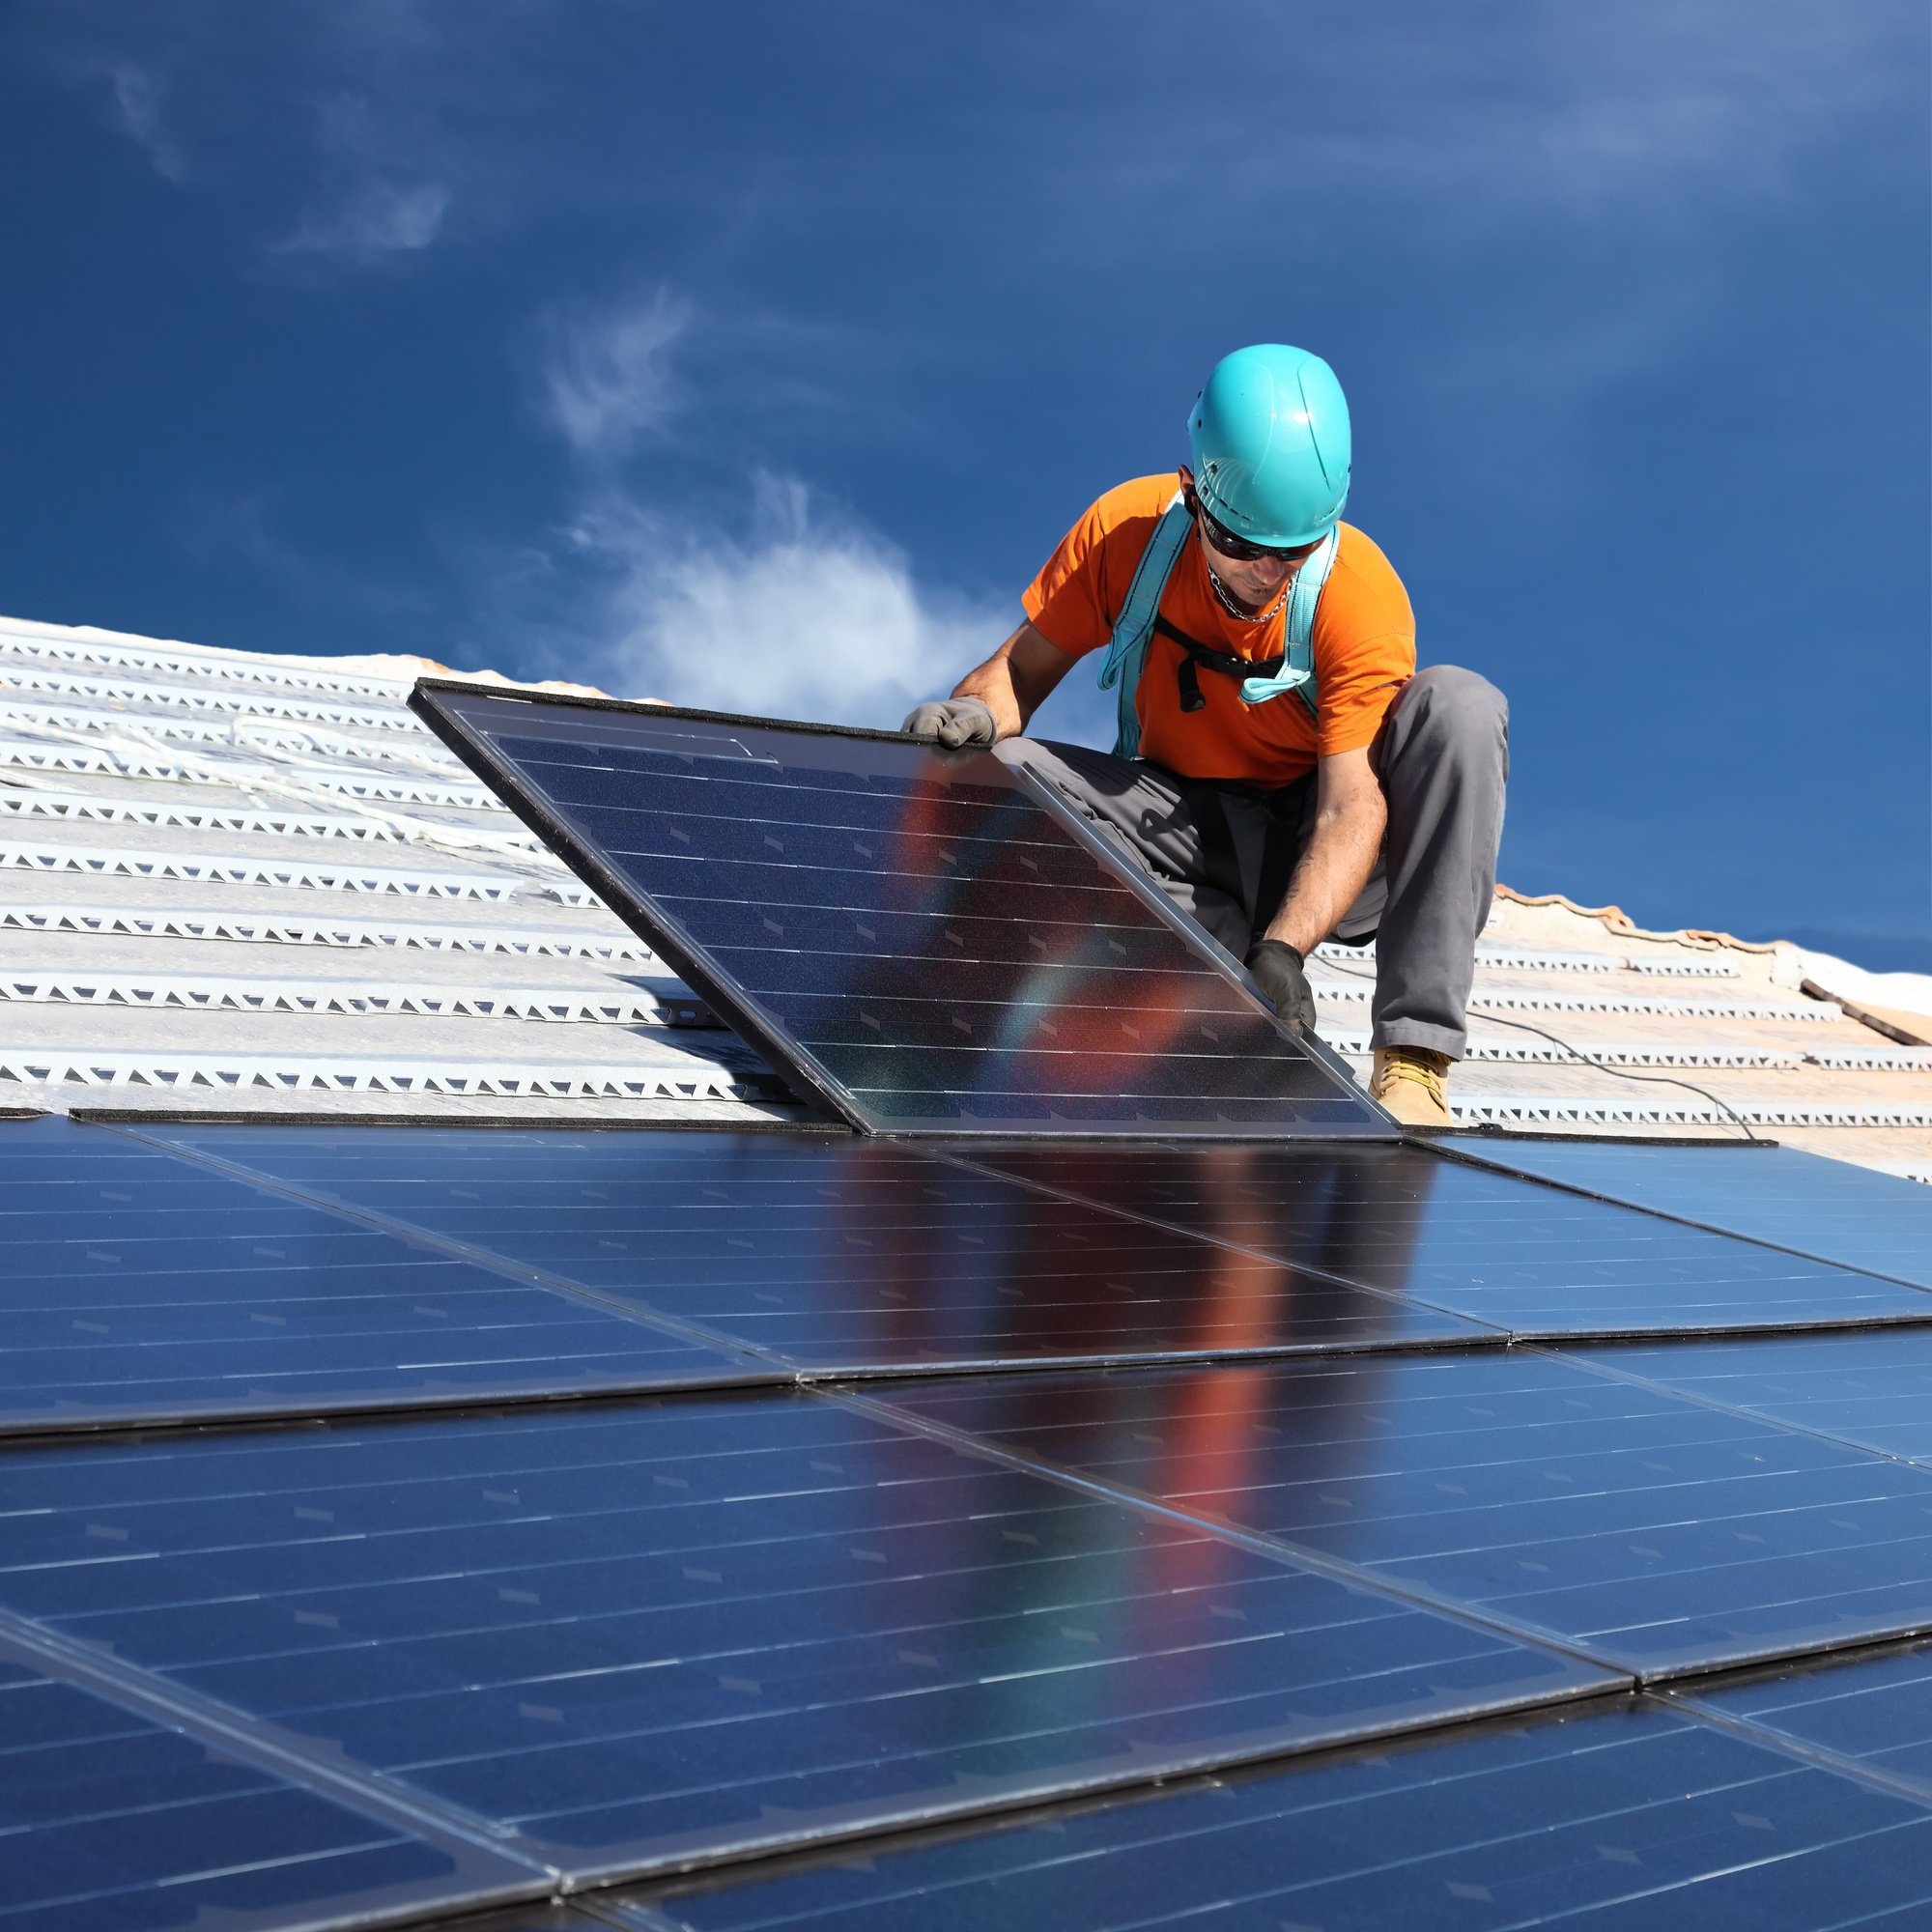 How a DIY Solar Panel Installation Can End Up Costing You More